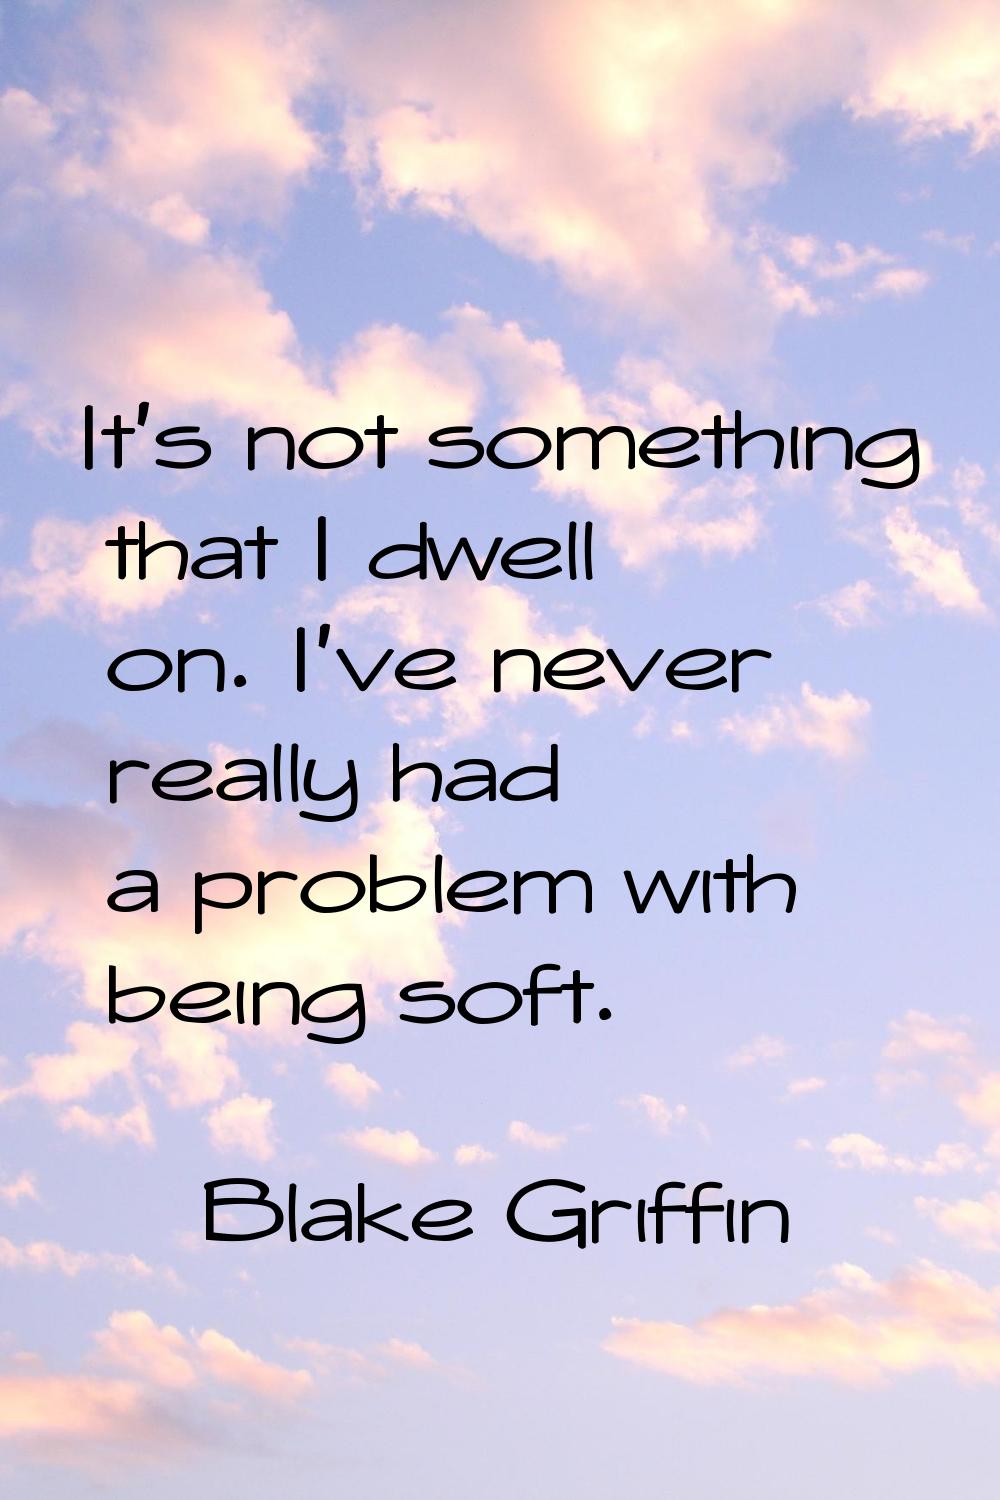 It's not something that I dwell on. I've never really had a problem with being soft.